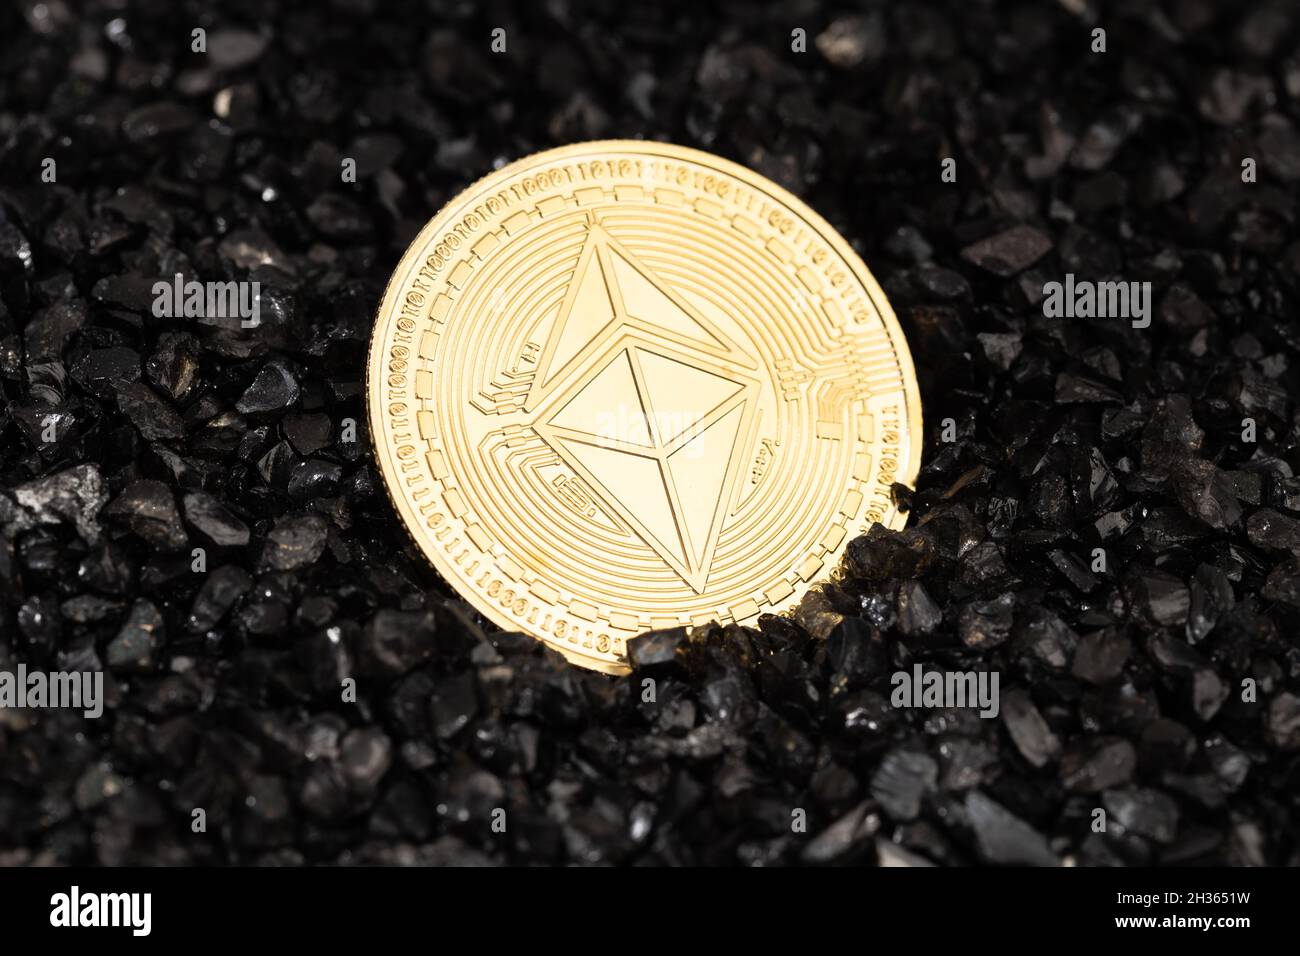 Ethereum classic coin on black gravel background. Cryptocurrency blockchain money Stock Photo